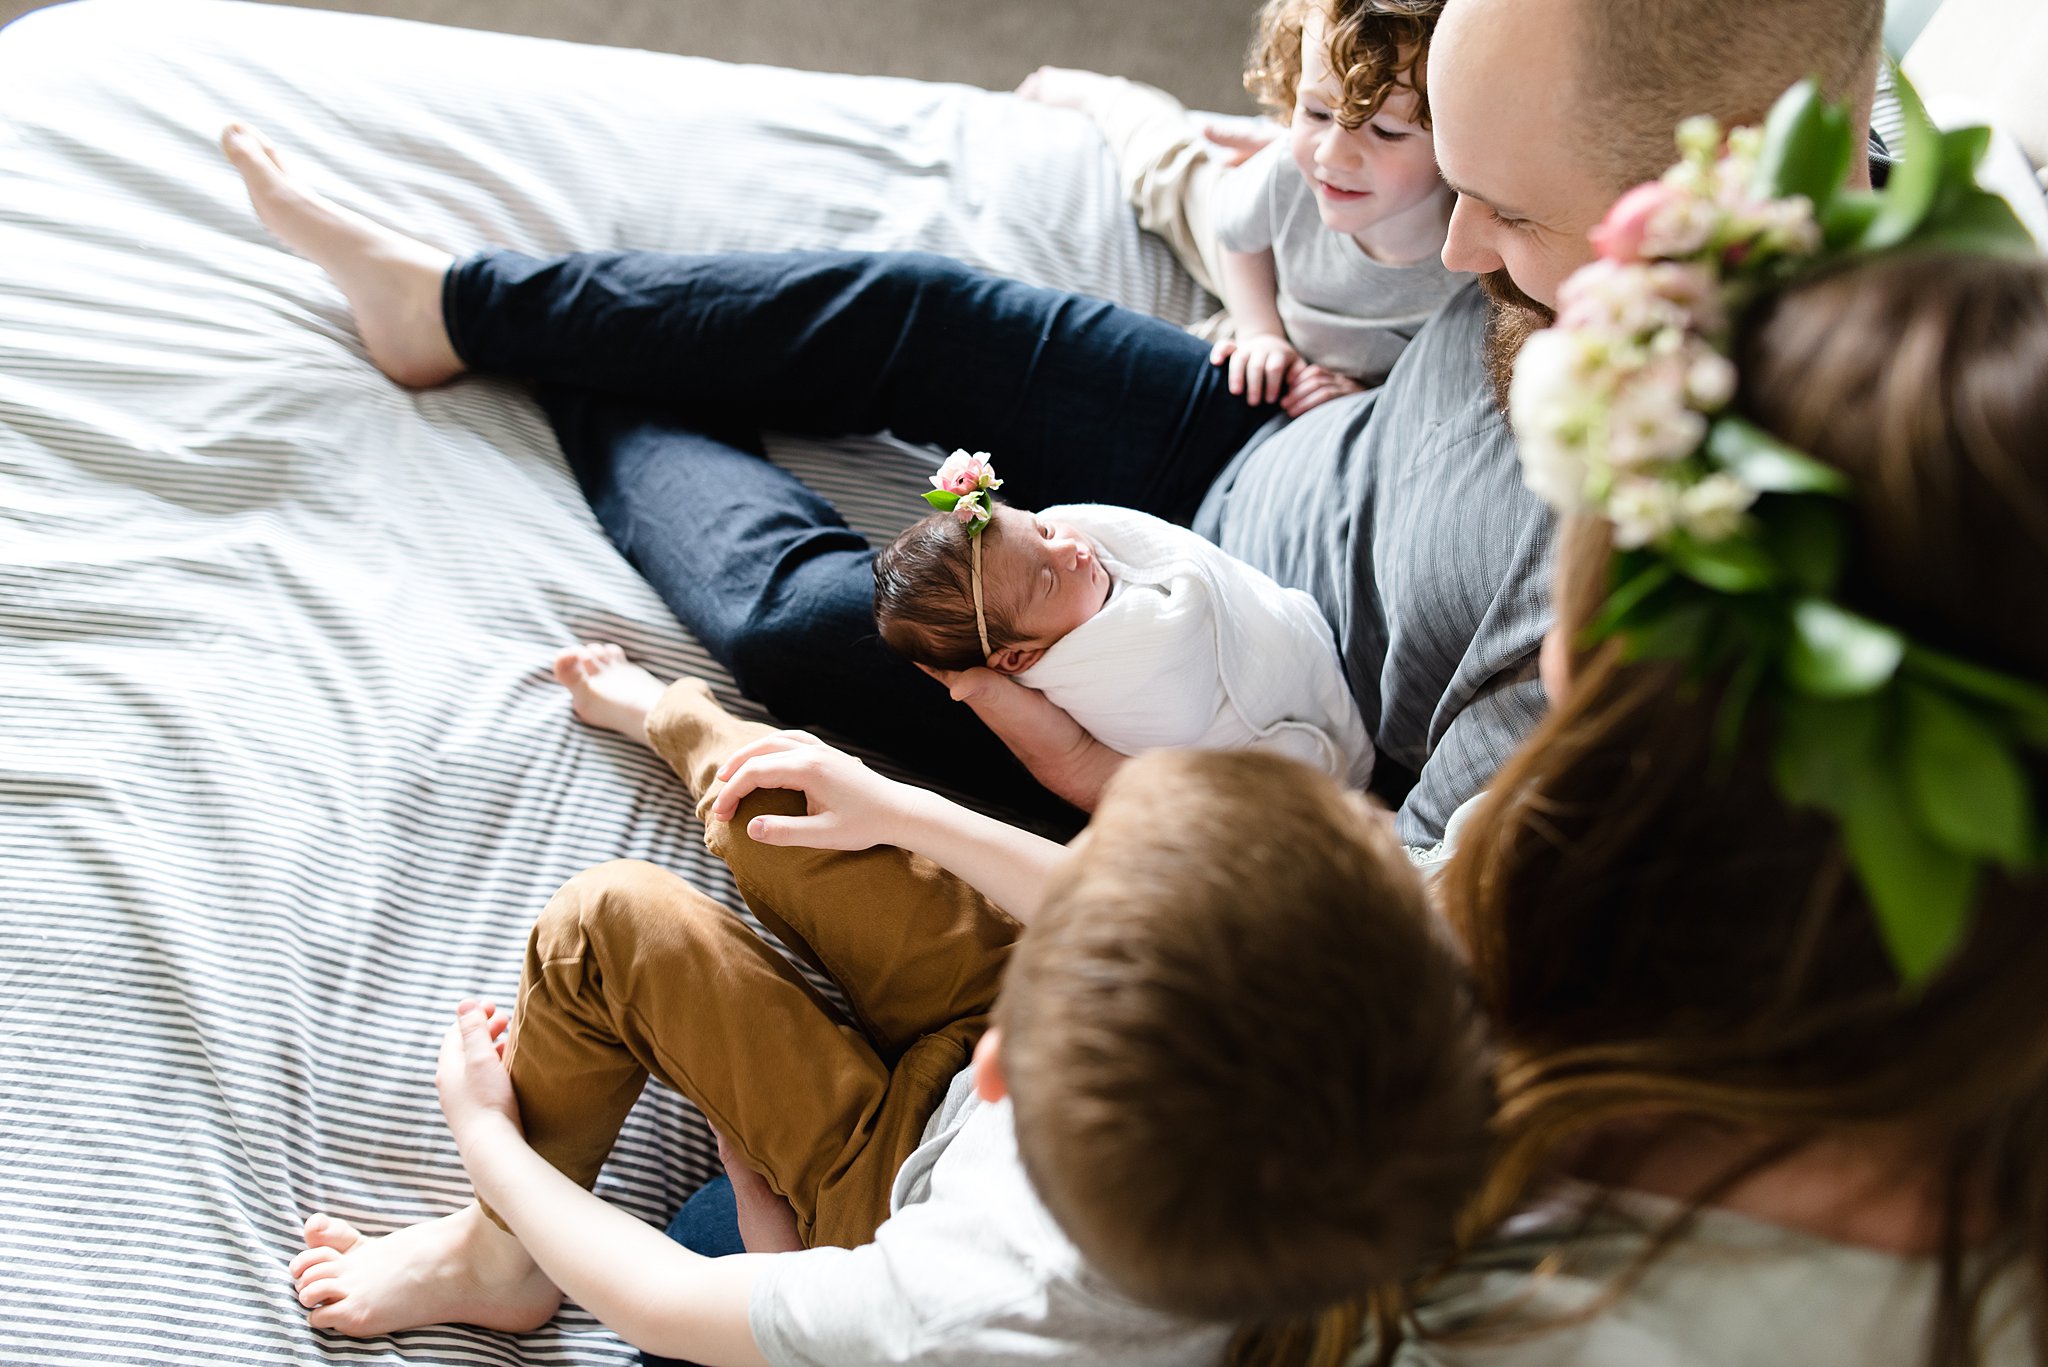  family is cozy together on a bed gazing adoringly at their new baby girl 